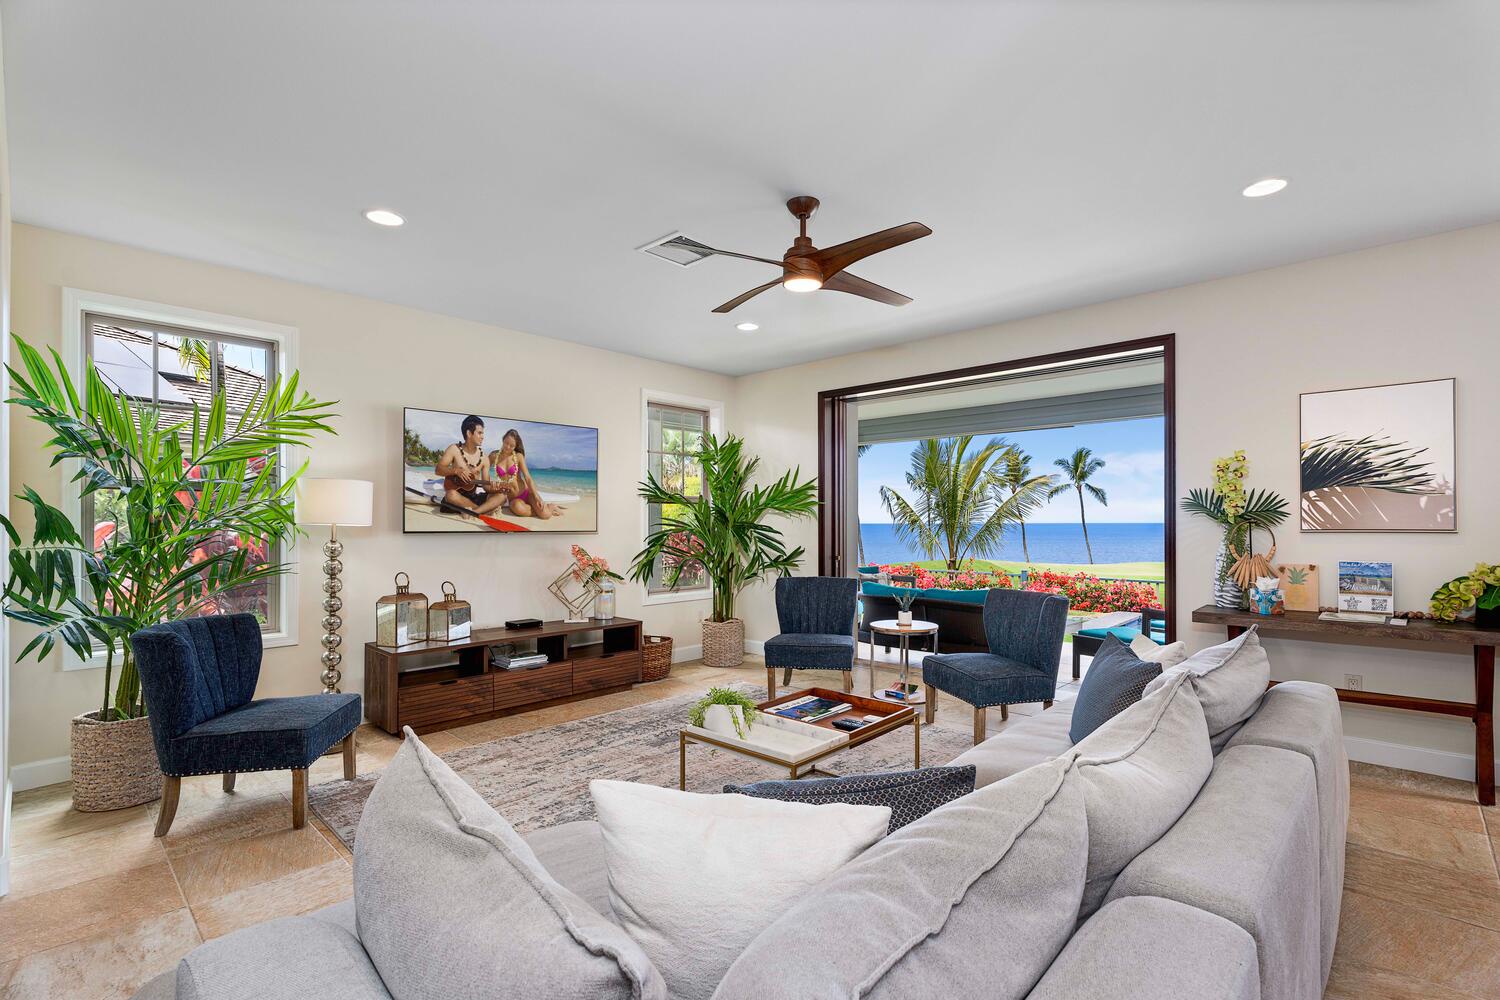 Kailua-Kona Vacation Rentals, Holua Kai #26 - Living room with a stunning ocean view and tropical decor elements.